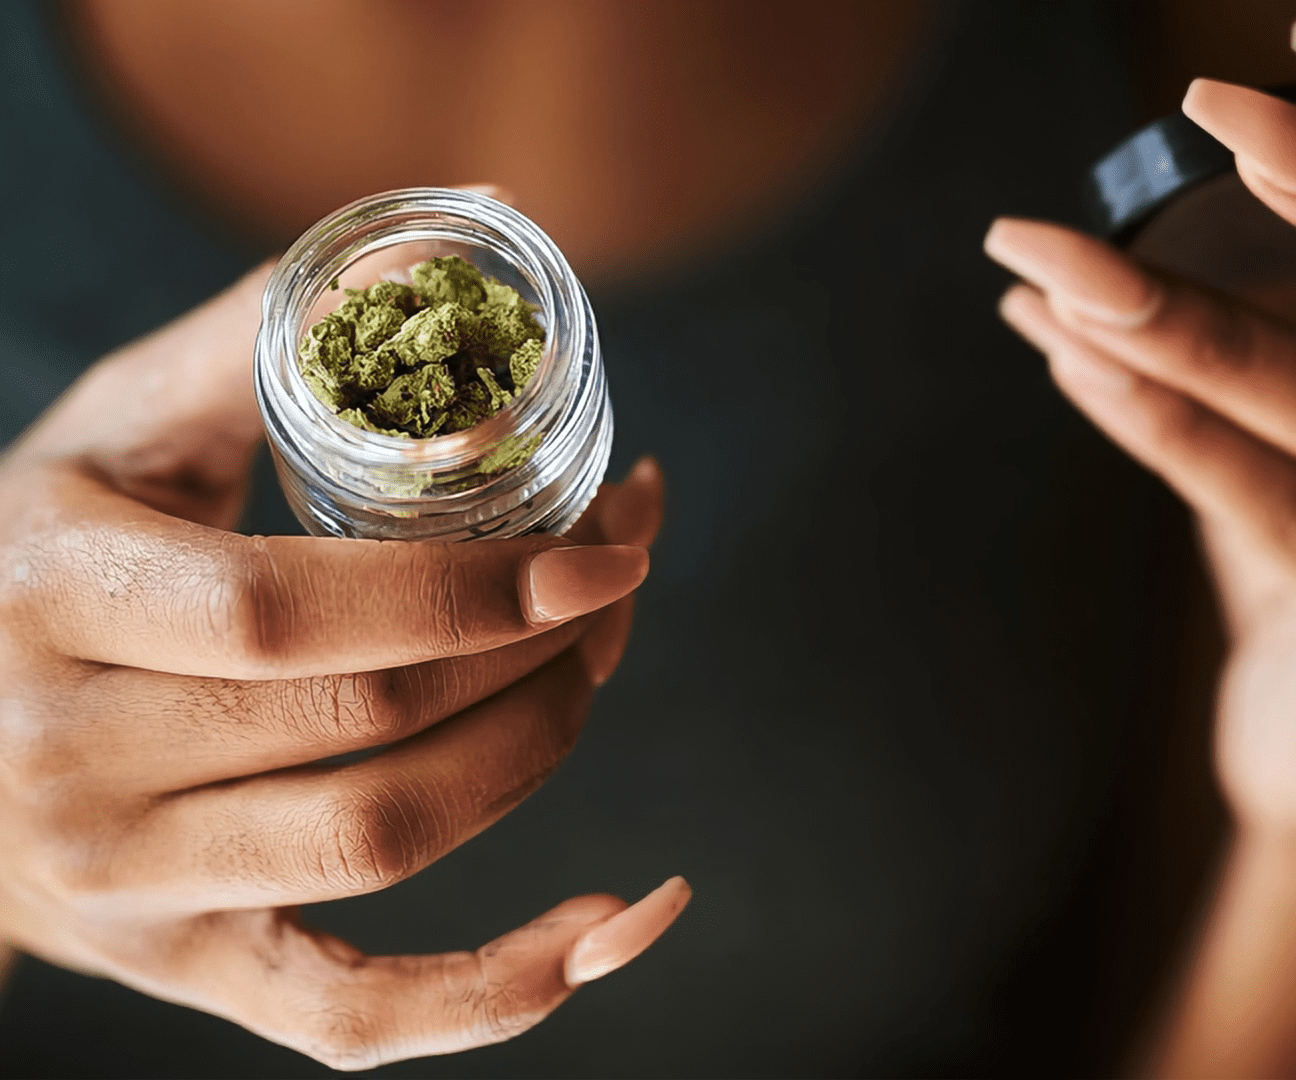 how to detox from weed